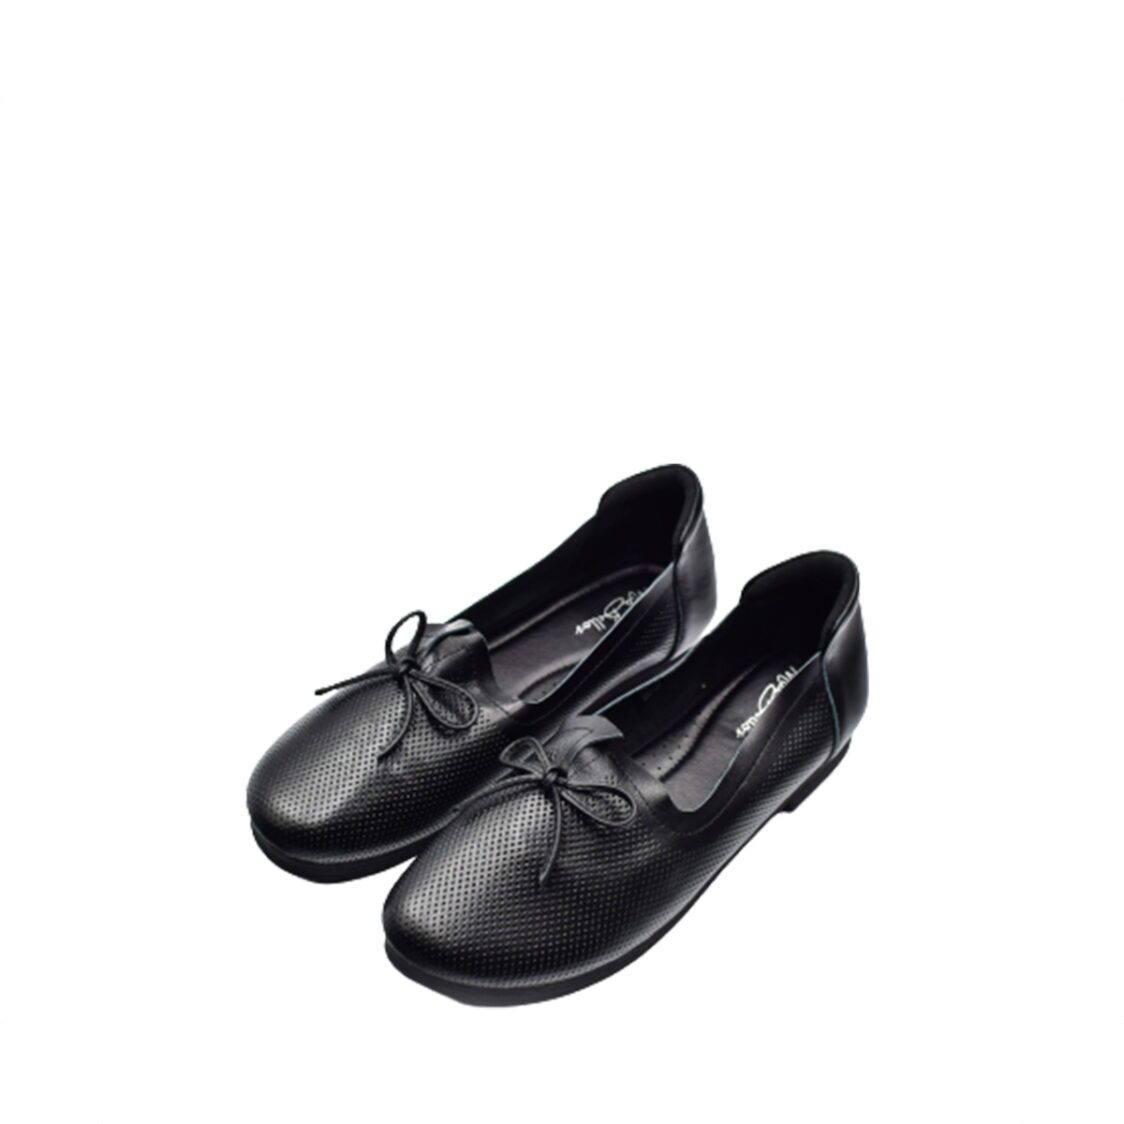 Mia Bellos Comfort Leather Shoe With Ribbon Black 5019